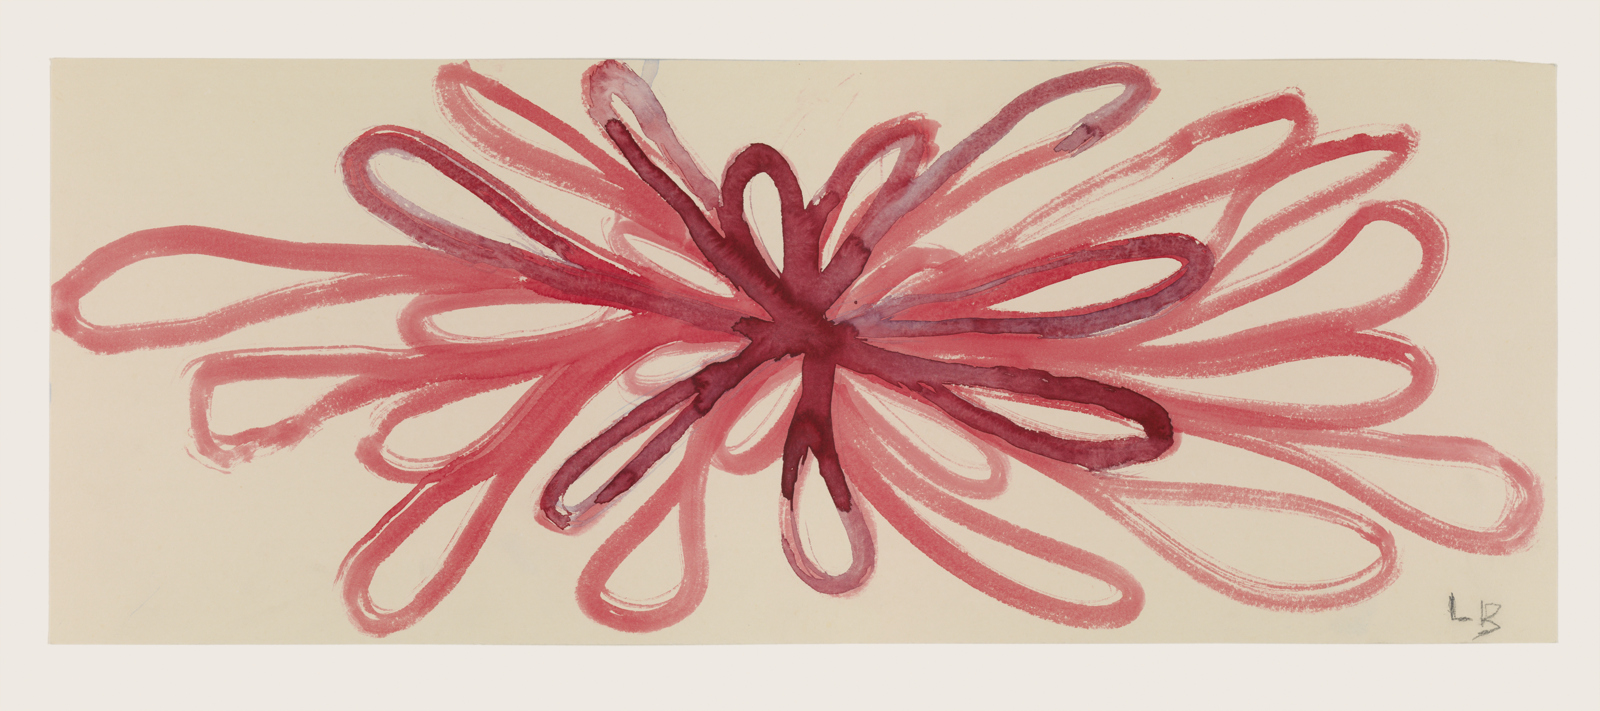 Louise Bourgeois / Hauser & Wirth